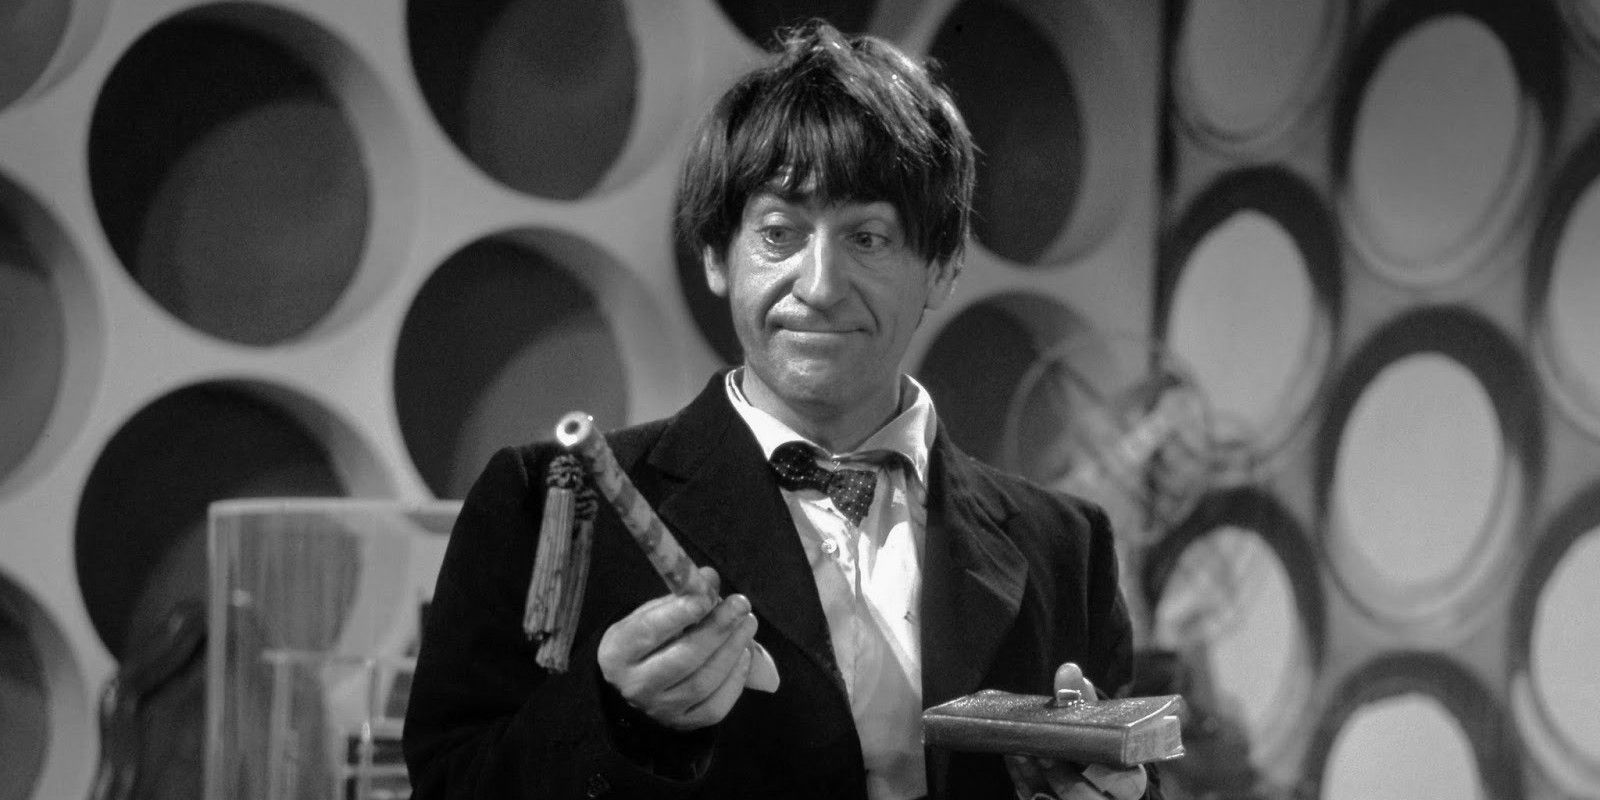 Patrick Troughton as Second Doctor in Doctor Who